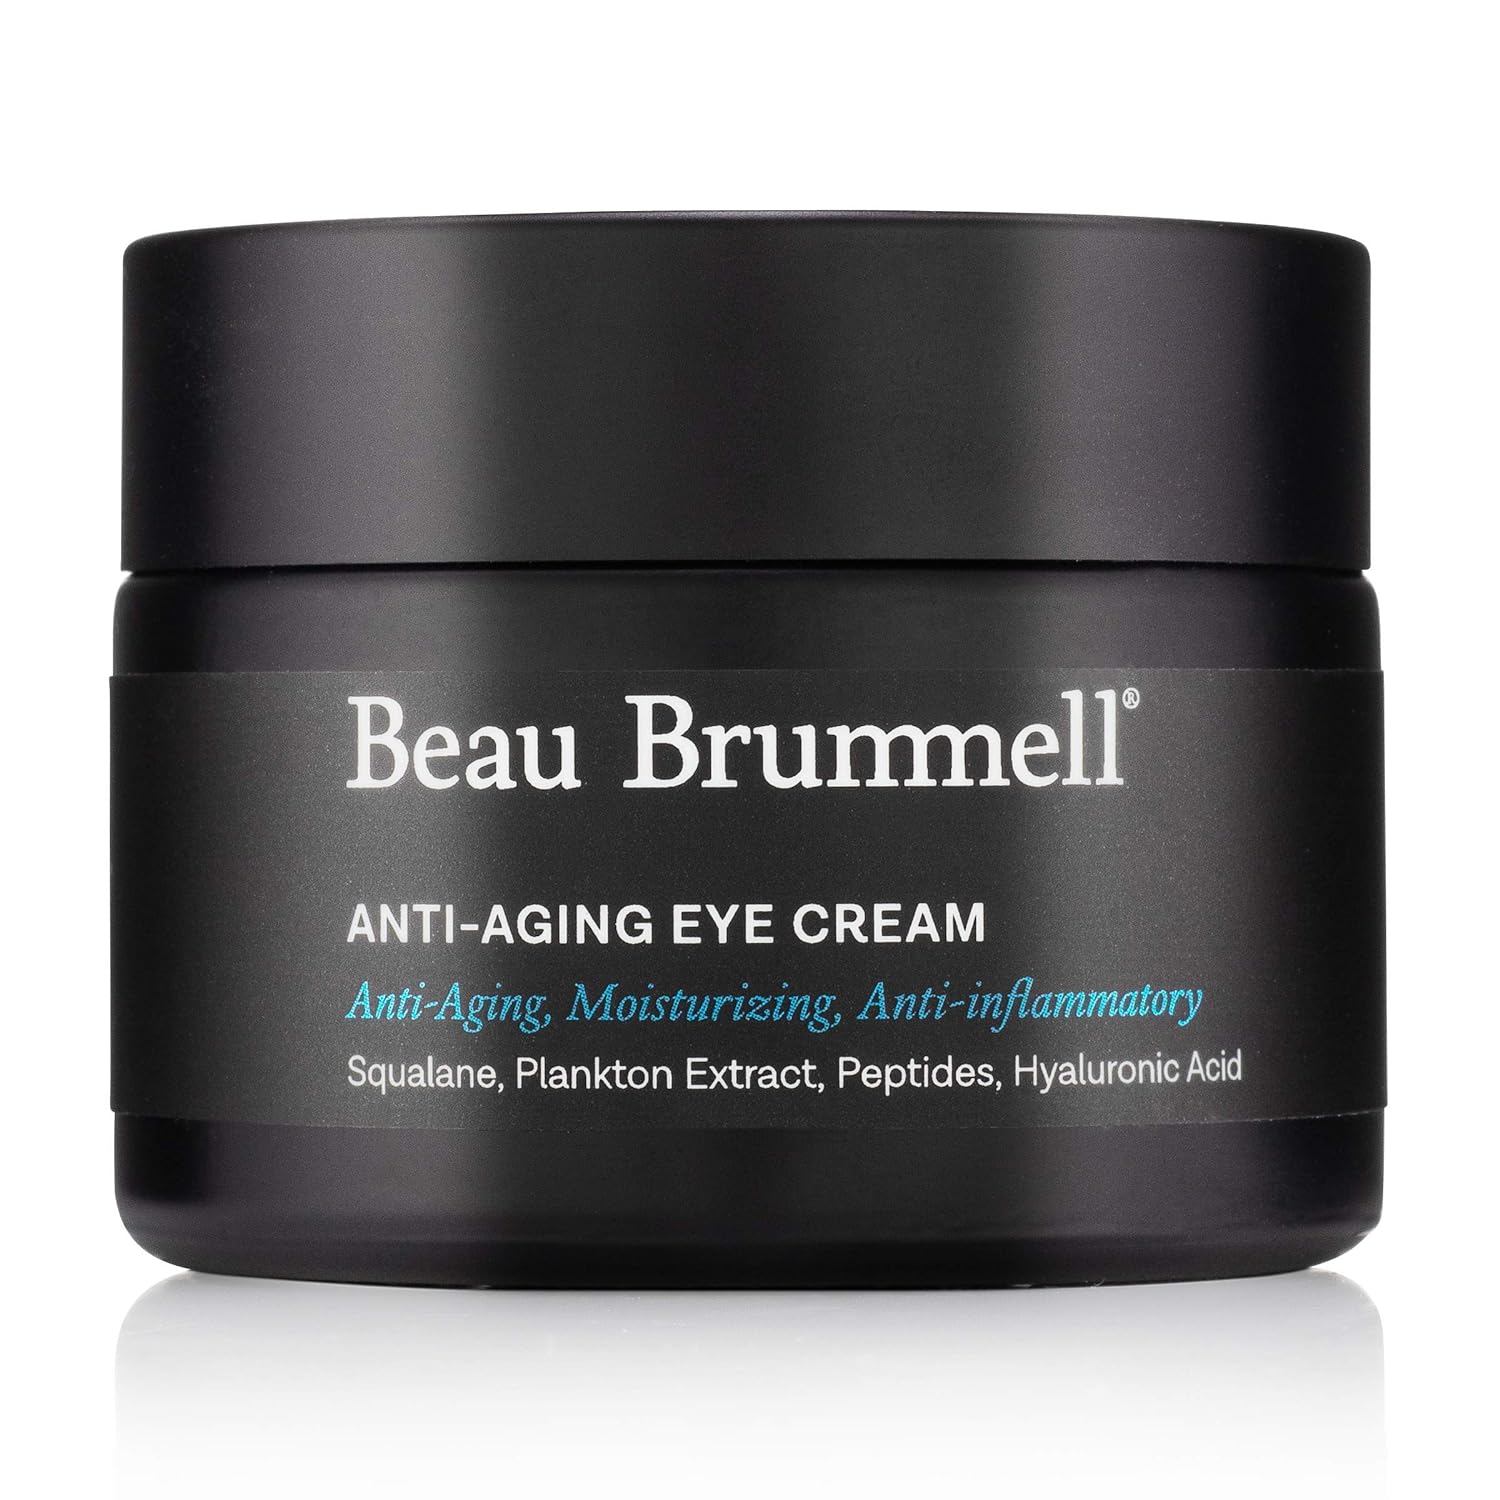 Beau Brummell For Men Anti-aging Eye Cream | Moisturizing Lotion Works on Wrinkles, Fine Lines, Dark Circles, Puffiness, Bags | Powered With Hyaluronic Acid, Squalane, Caffeine | Fragrance-Free 1.7  | Made in USA